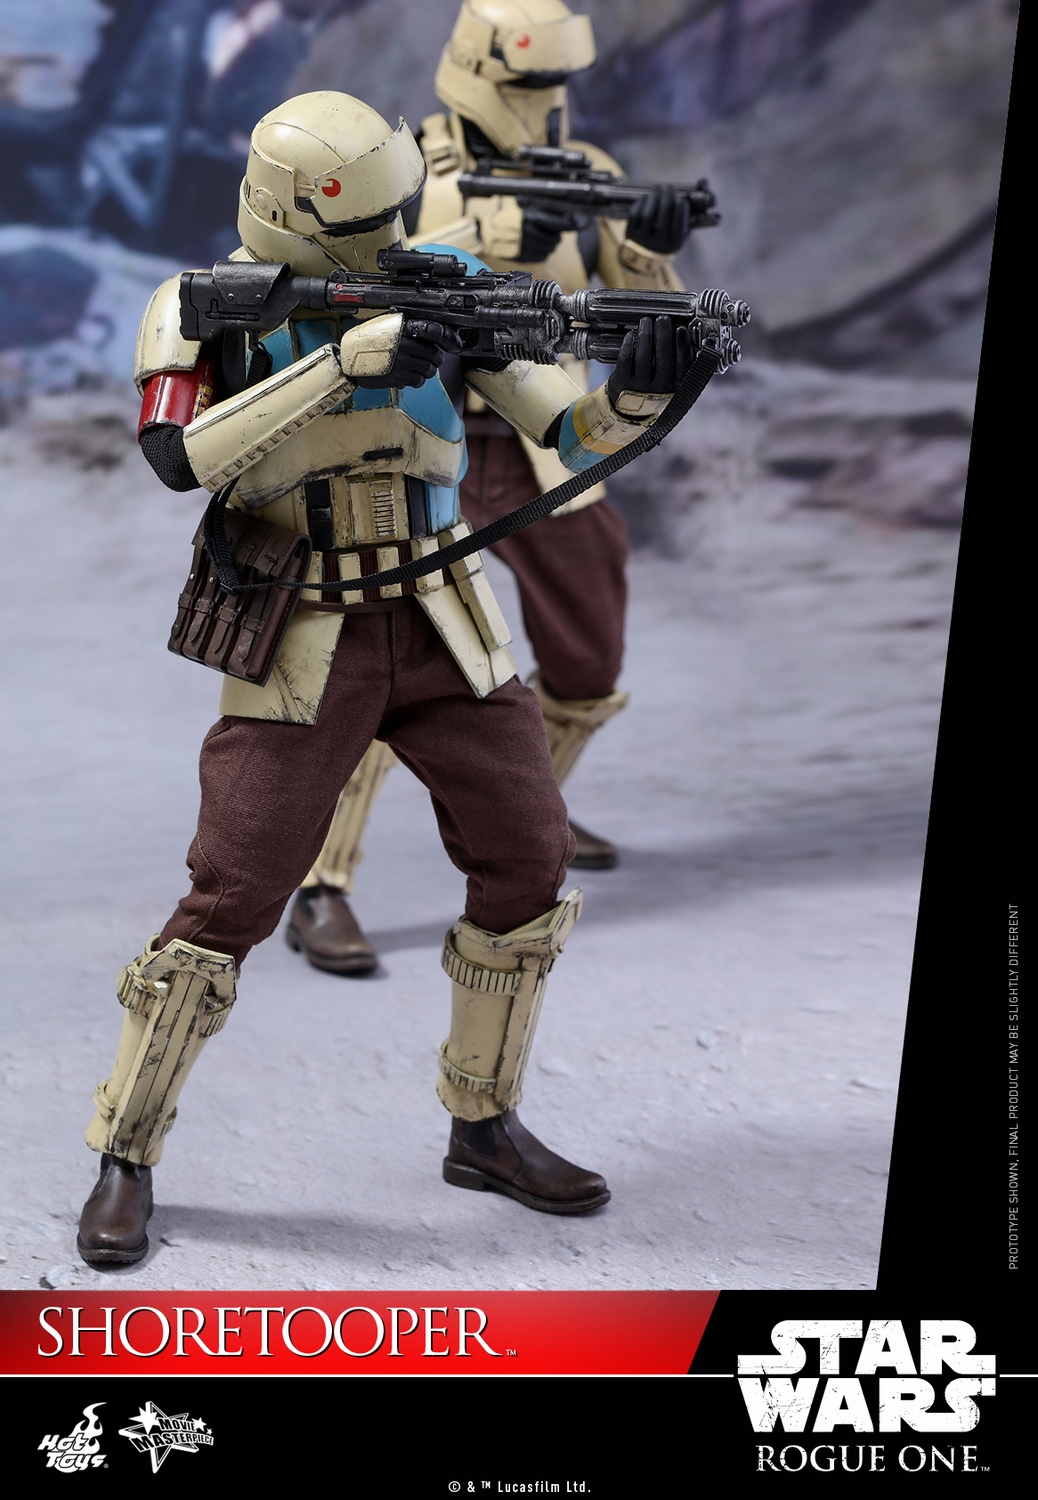 hot-toys-star-wars-rogue-one-shoretrooper-collectible-figure-092916-002.jpg